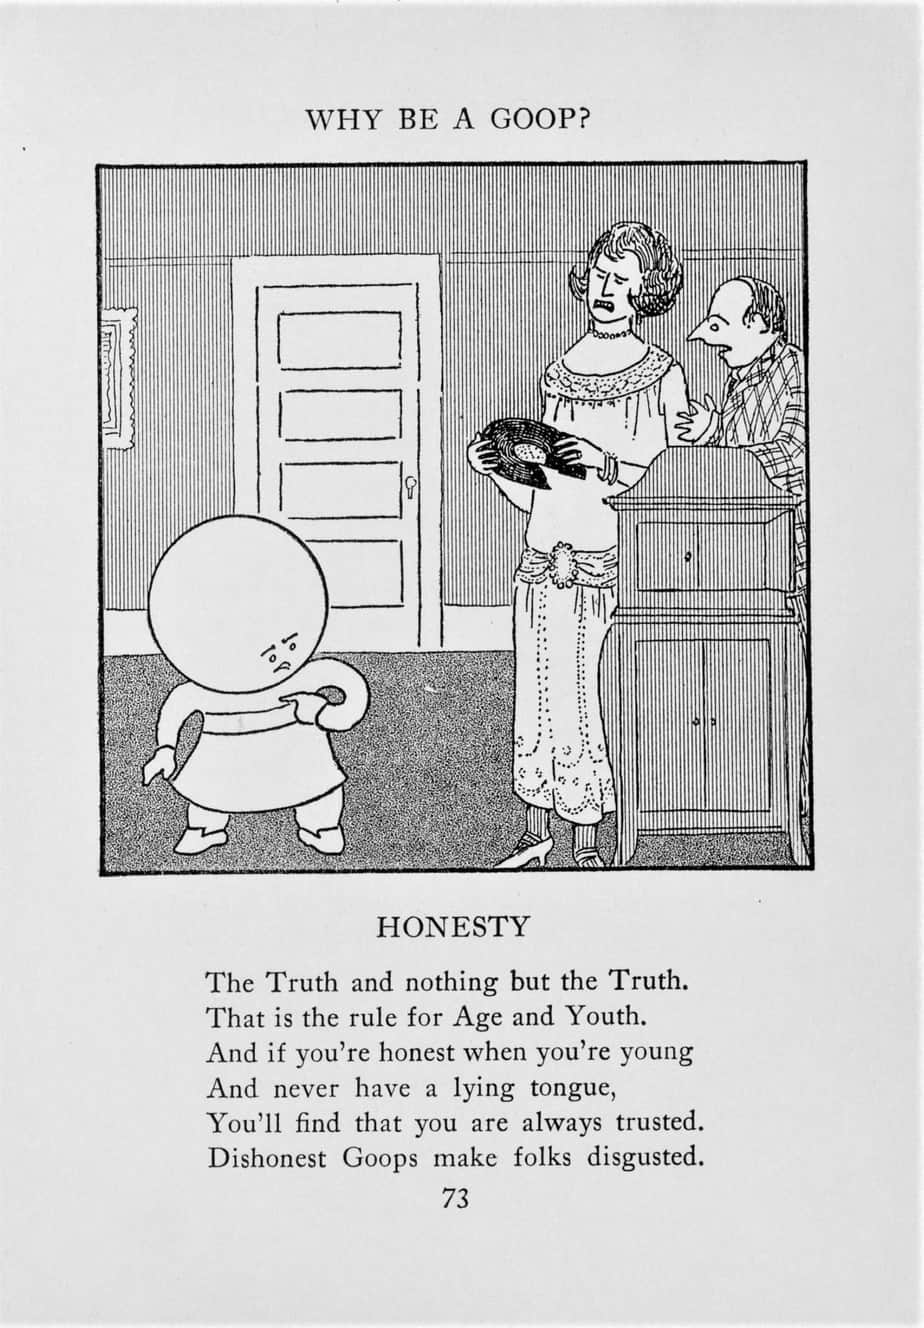 From 'Why Be a Goop A Primary School of Deportment and Taste for Children,' by author artist Gelett Burgess, 1924 Honesty